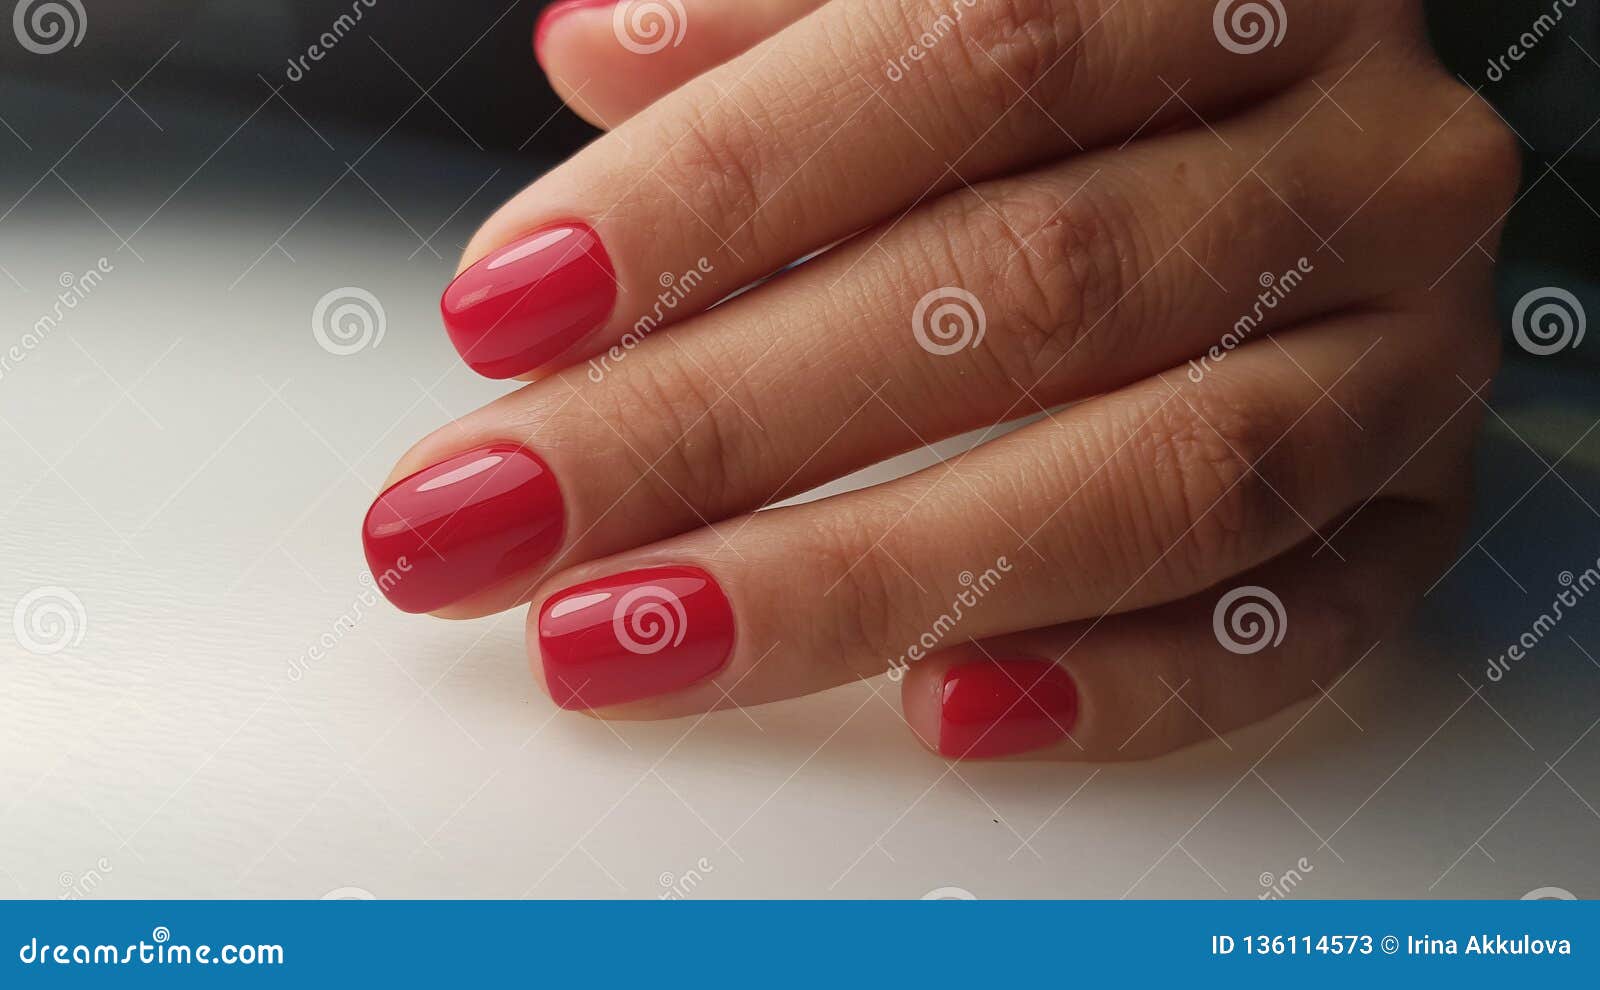 Cool Red Nails Stock Image Image Of Photo Certificate 136114573